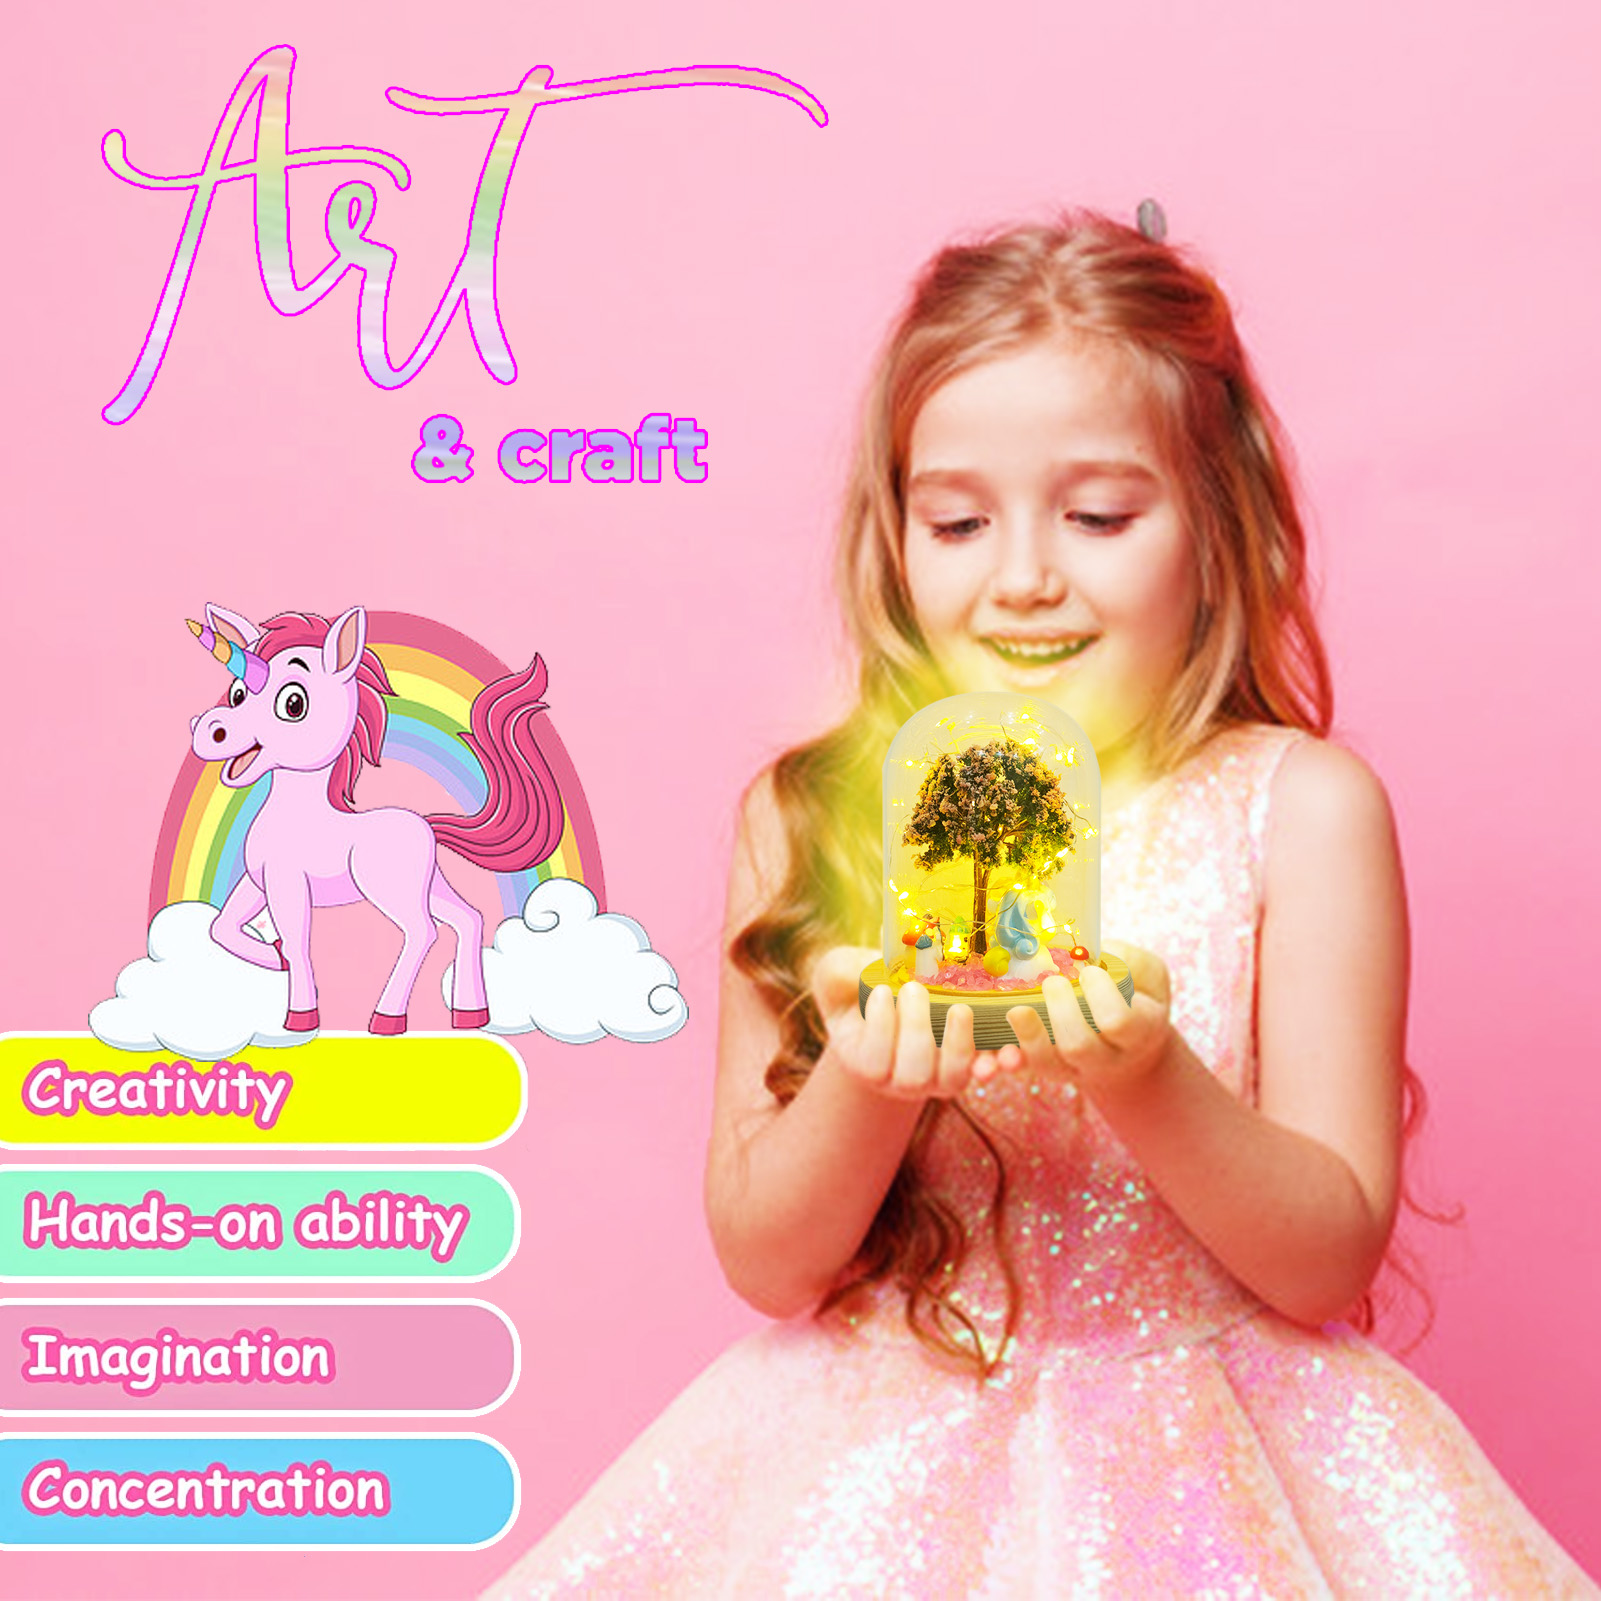 Night Light Crafts for Kids – DIY Crafts for Girls Ages 4-6 6-8, Cute Unicorn  Toys & Activities Kits Gifts, Arts & Crafts Stuff for Little Girls Age 4 5  6 7